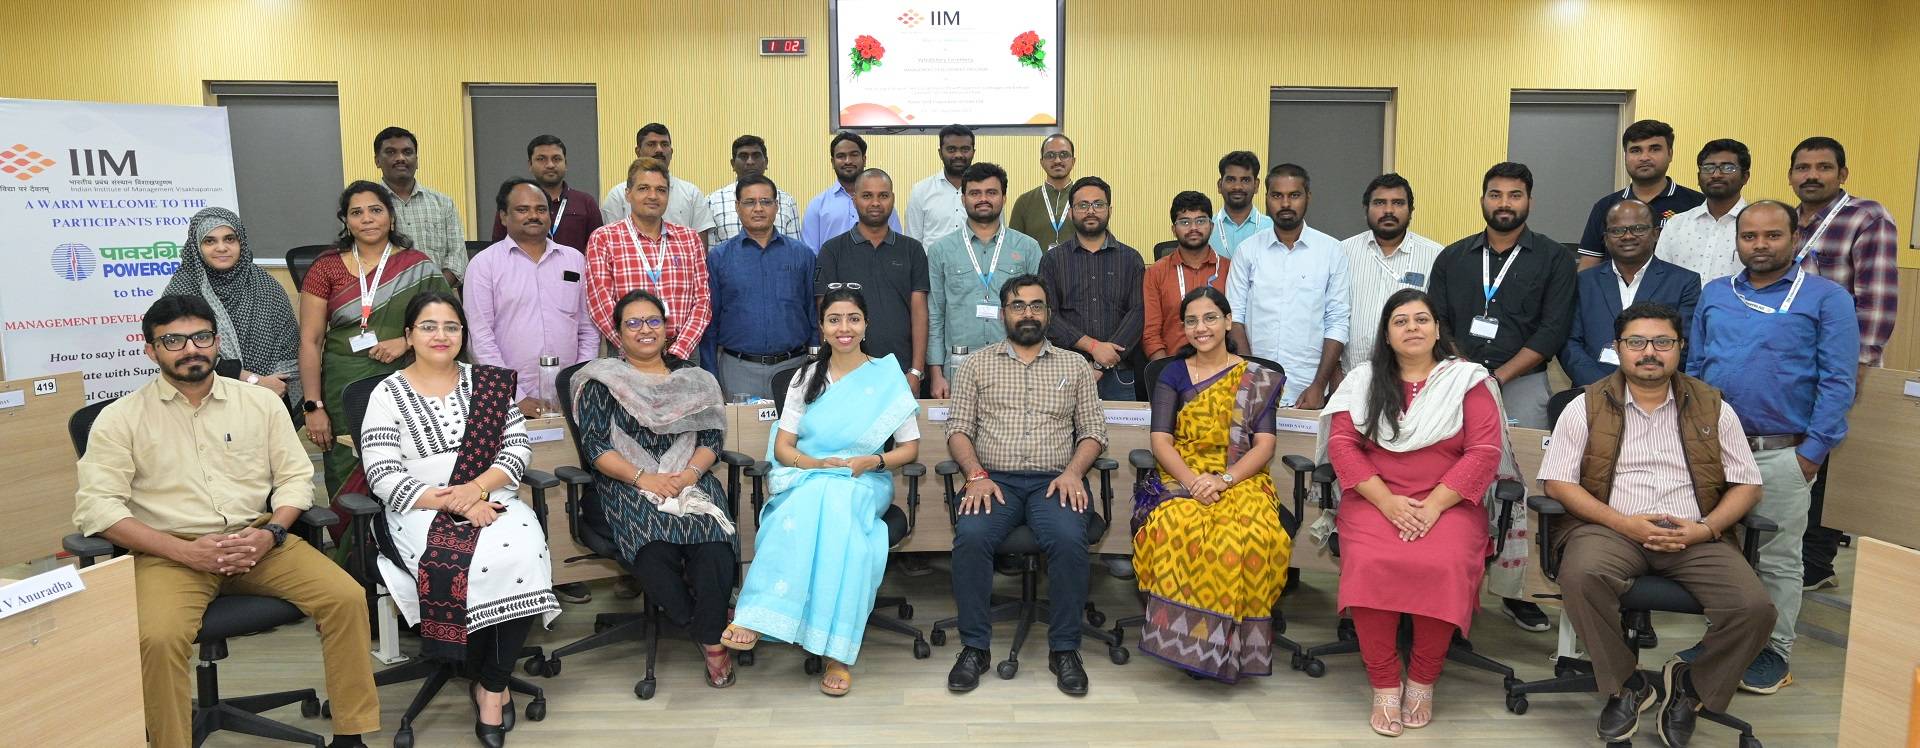 MDP for Executives from Power Grid Corporation of India Ltd. conducted at IIM Visakhapatnam